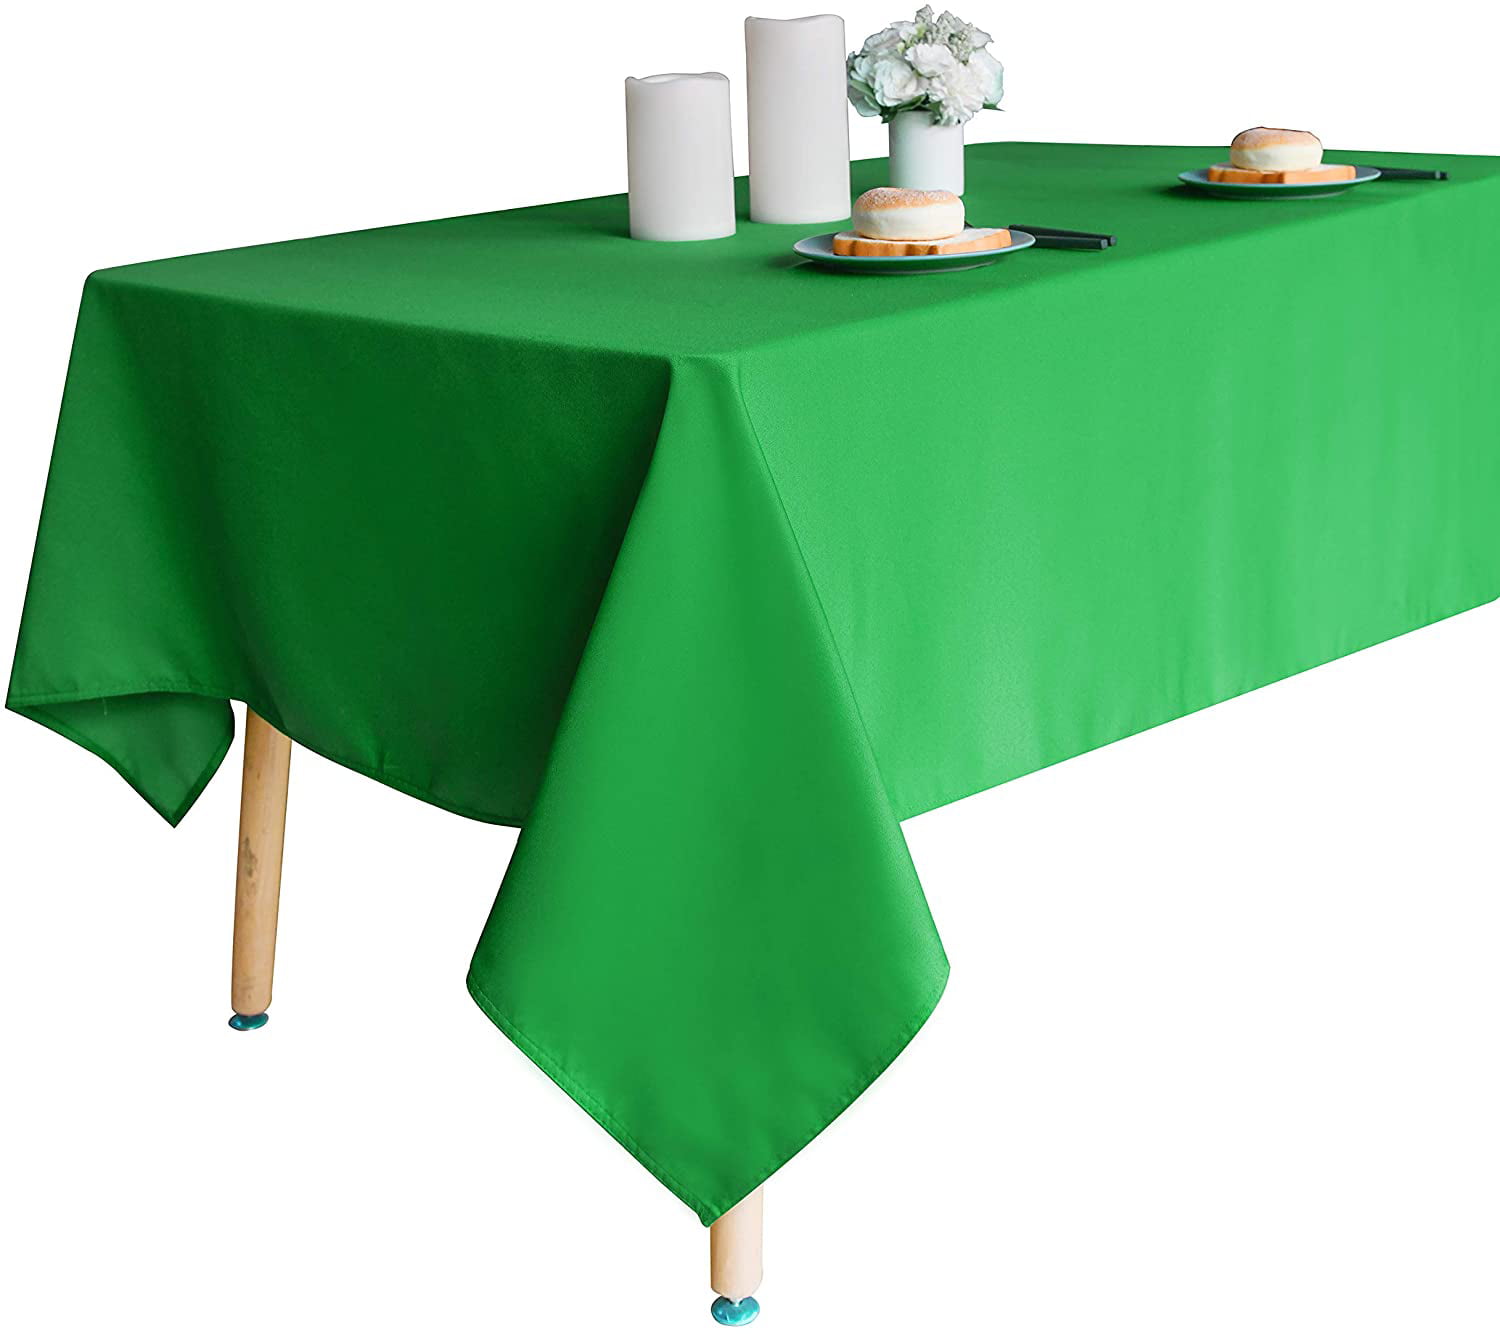 Multicolor Texture Geometry Proof Spill-Proof and Water Resistance Tablecloth,Decorative Fabric Table Cover for Outdoor and Indoor 60 X 90 Inch 